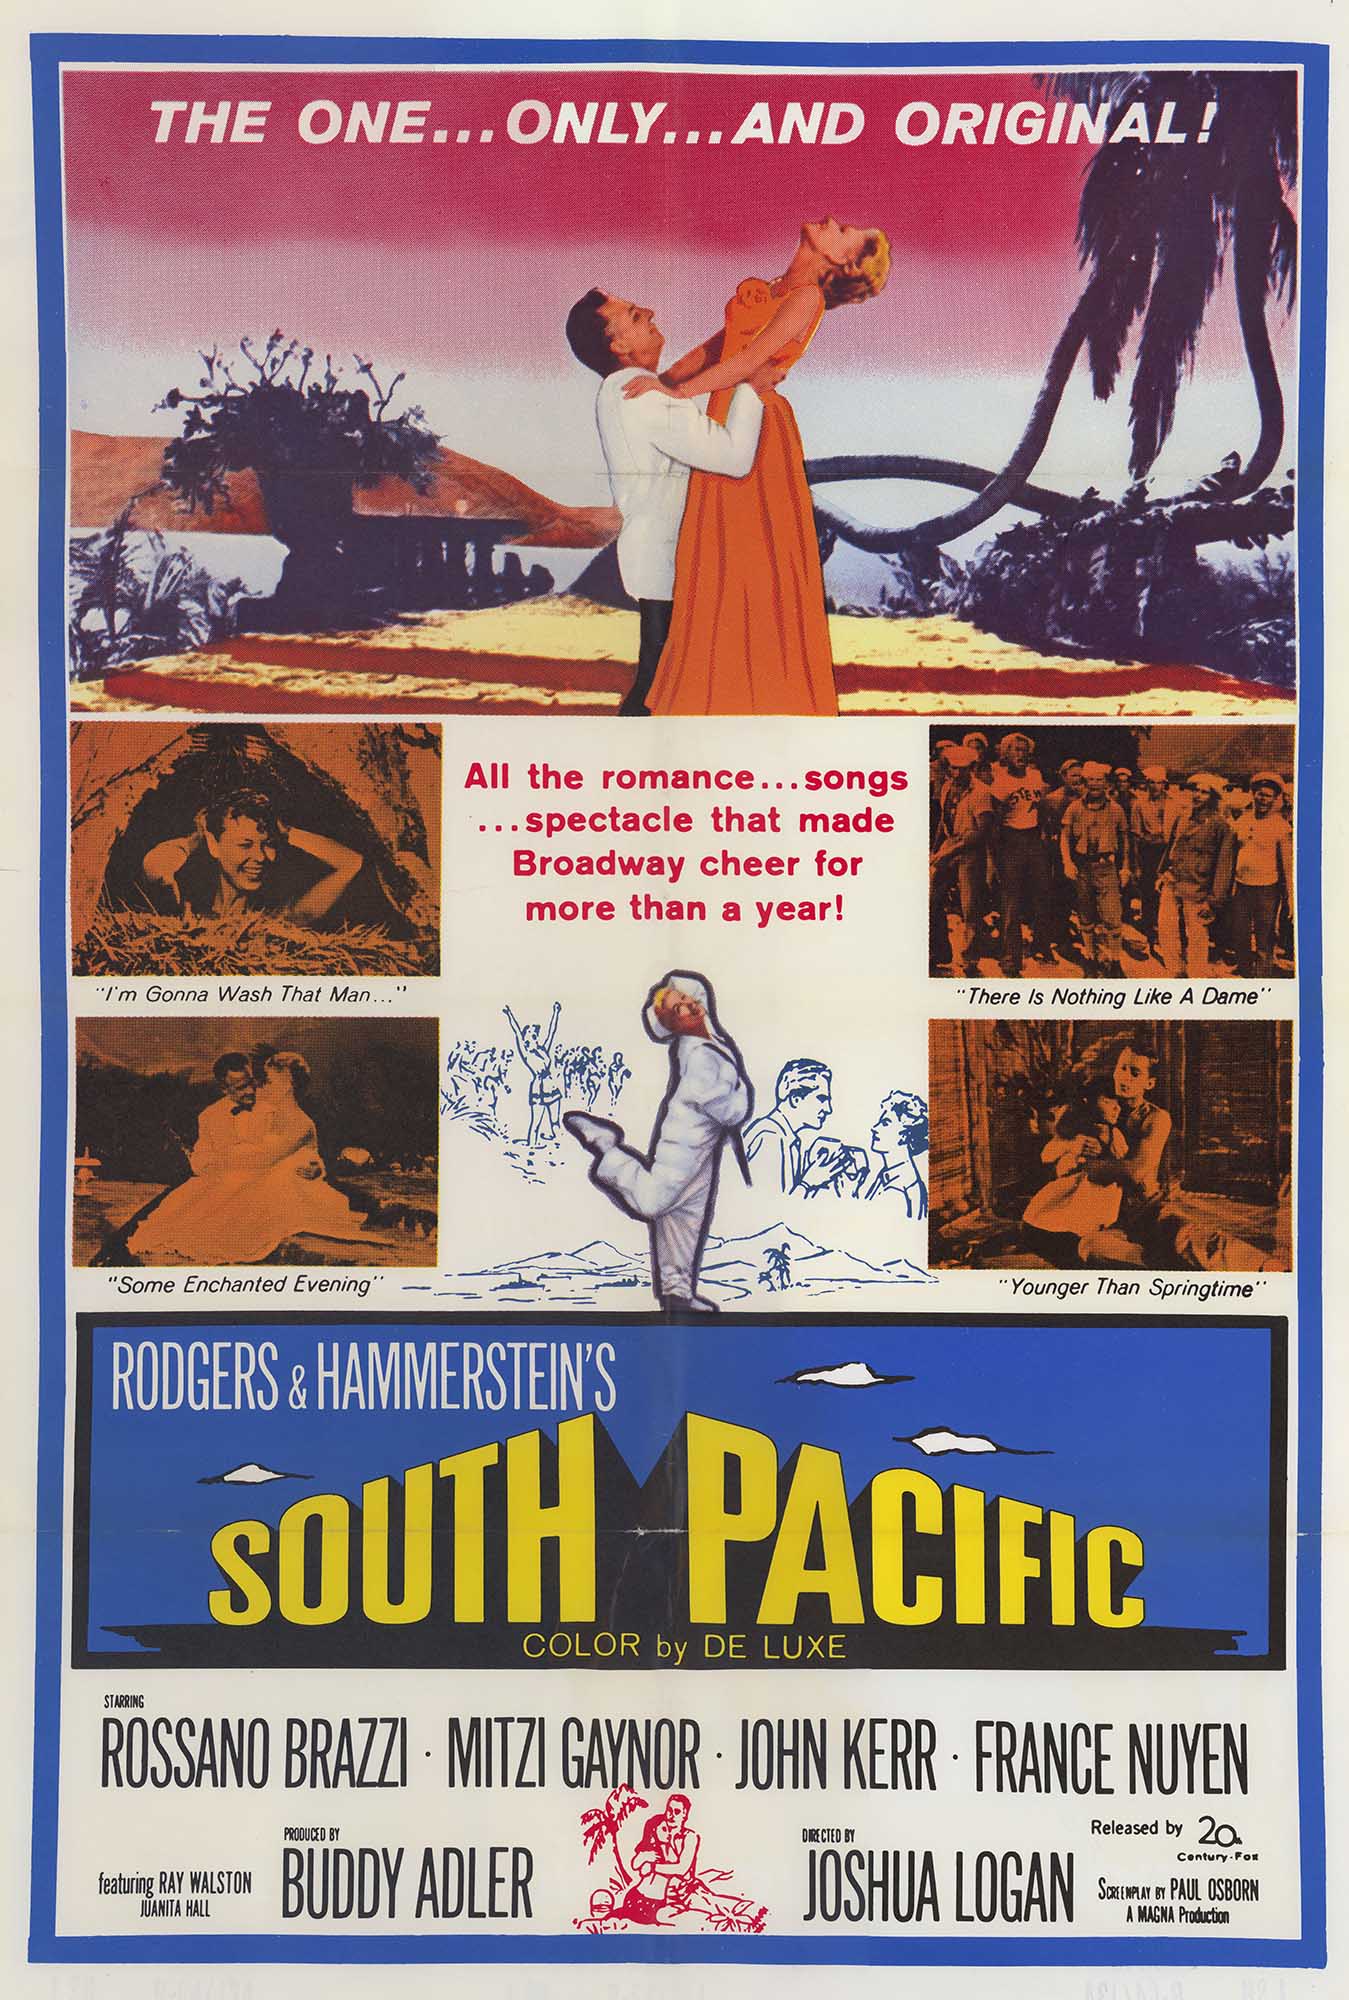 A poster for the 1958 film version of South Pacific.